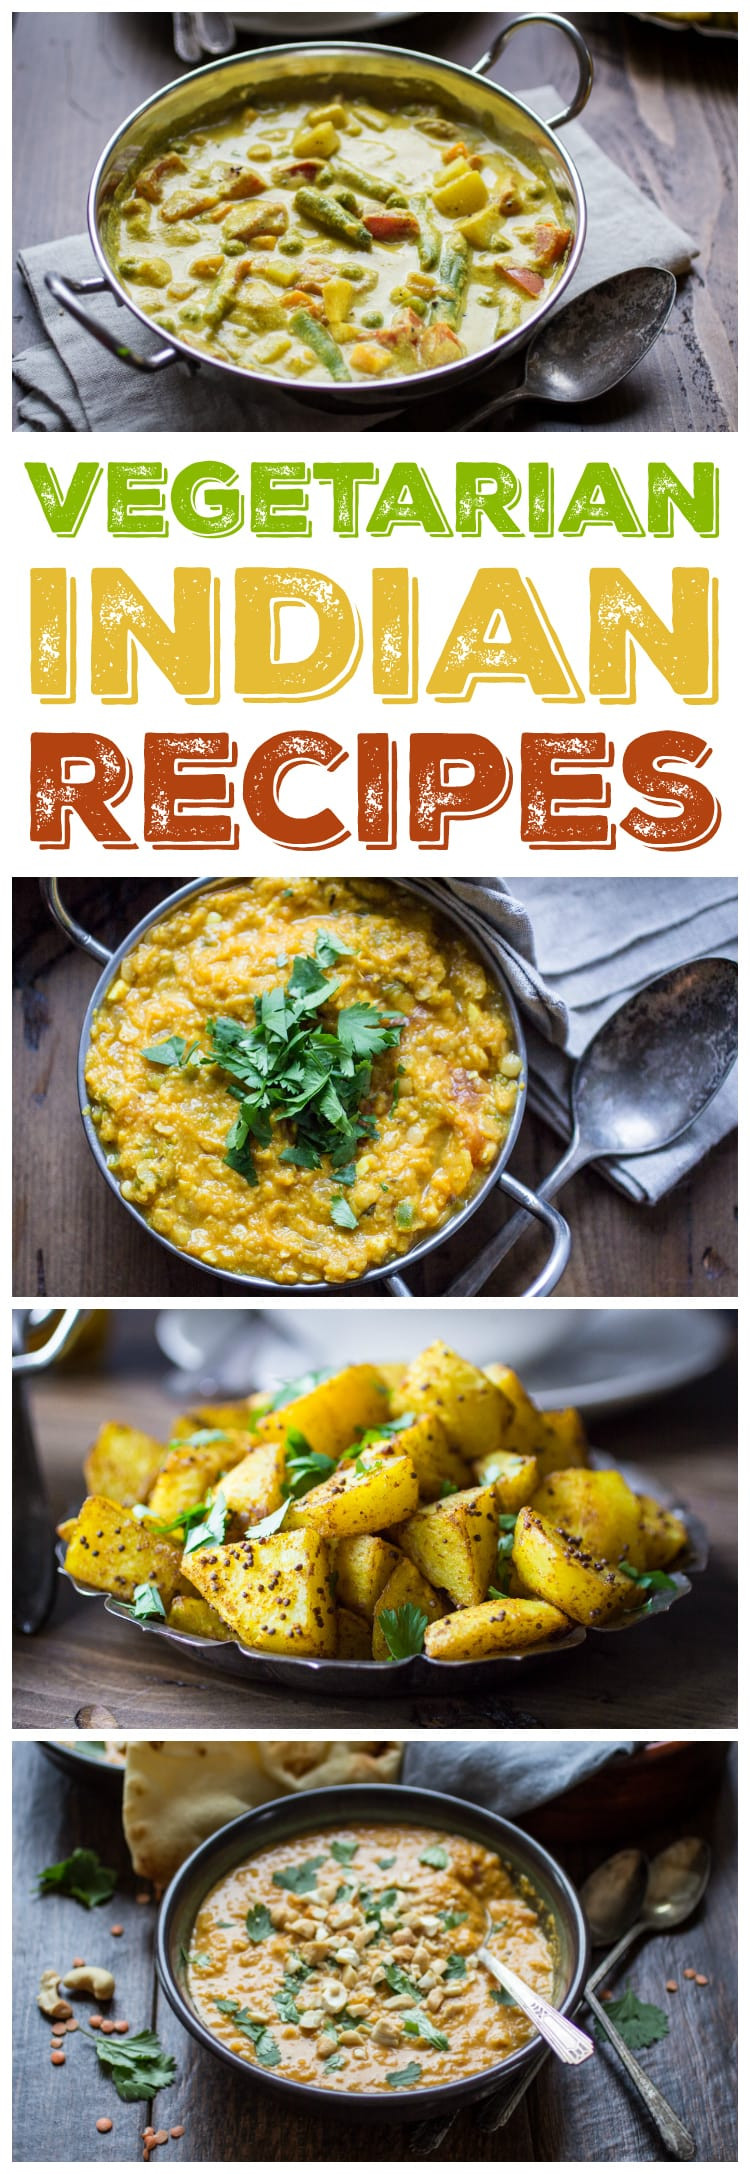 Indian Food Recipes
 10 Ve arian Indian Recipes to Make Again and Again The